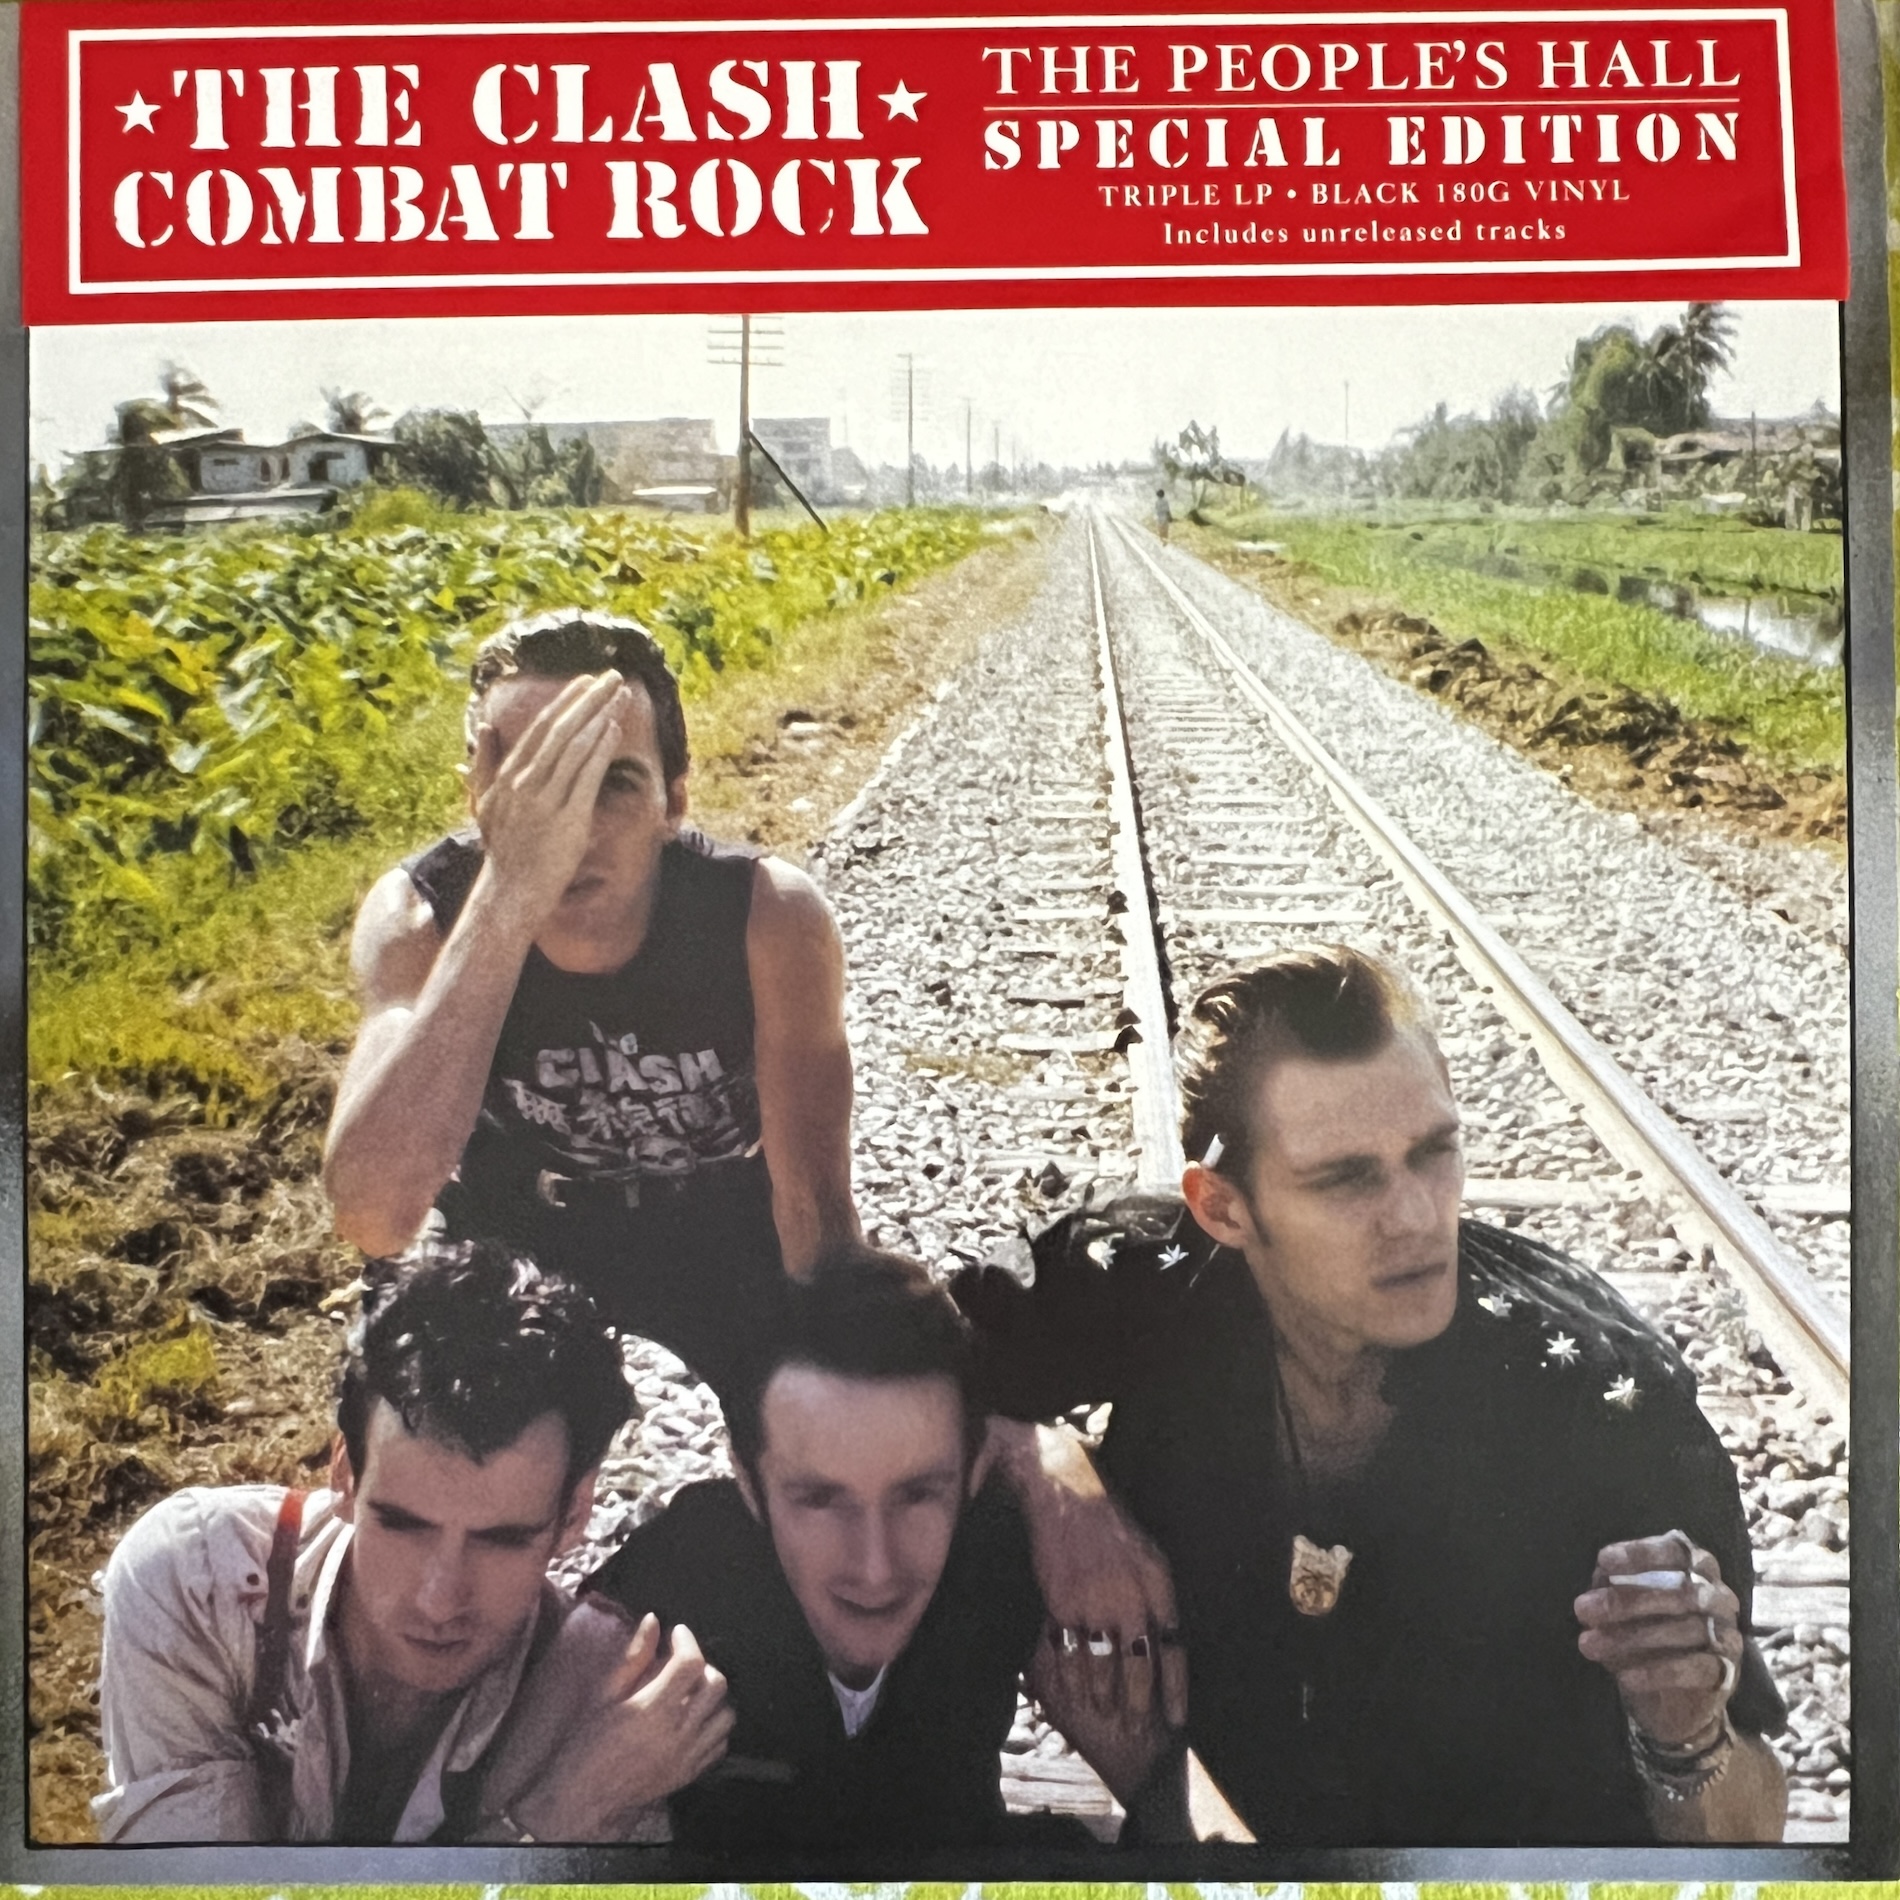 The Clash Combat Rock – The People's Hall special edition box cover